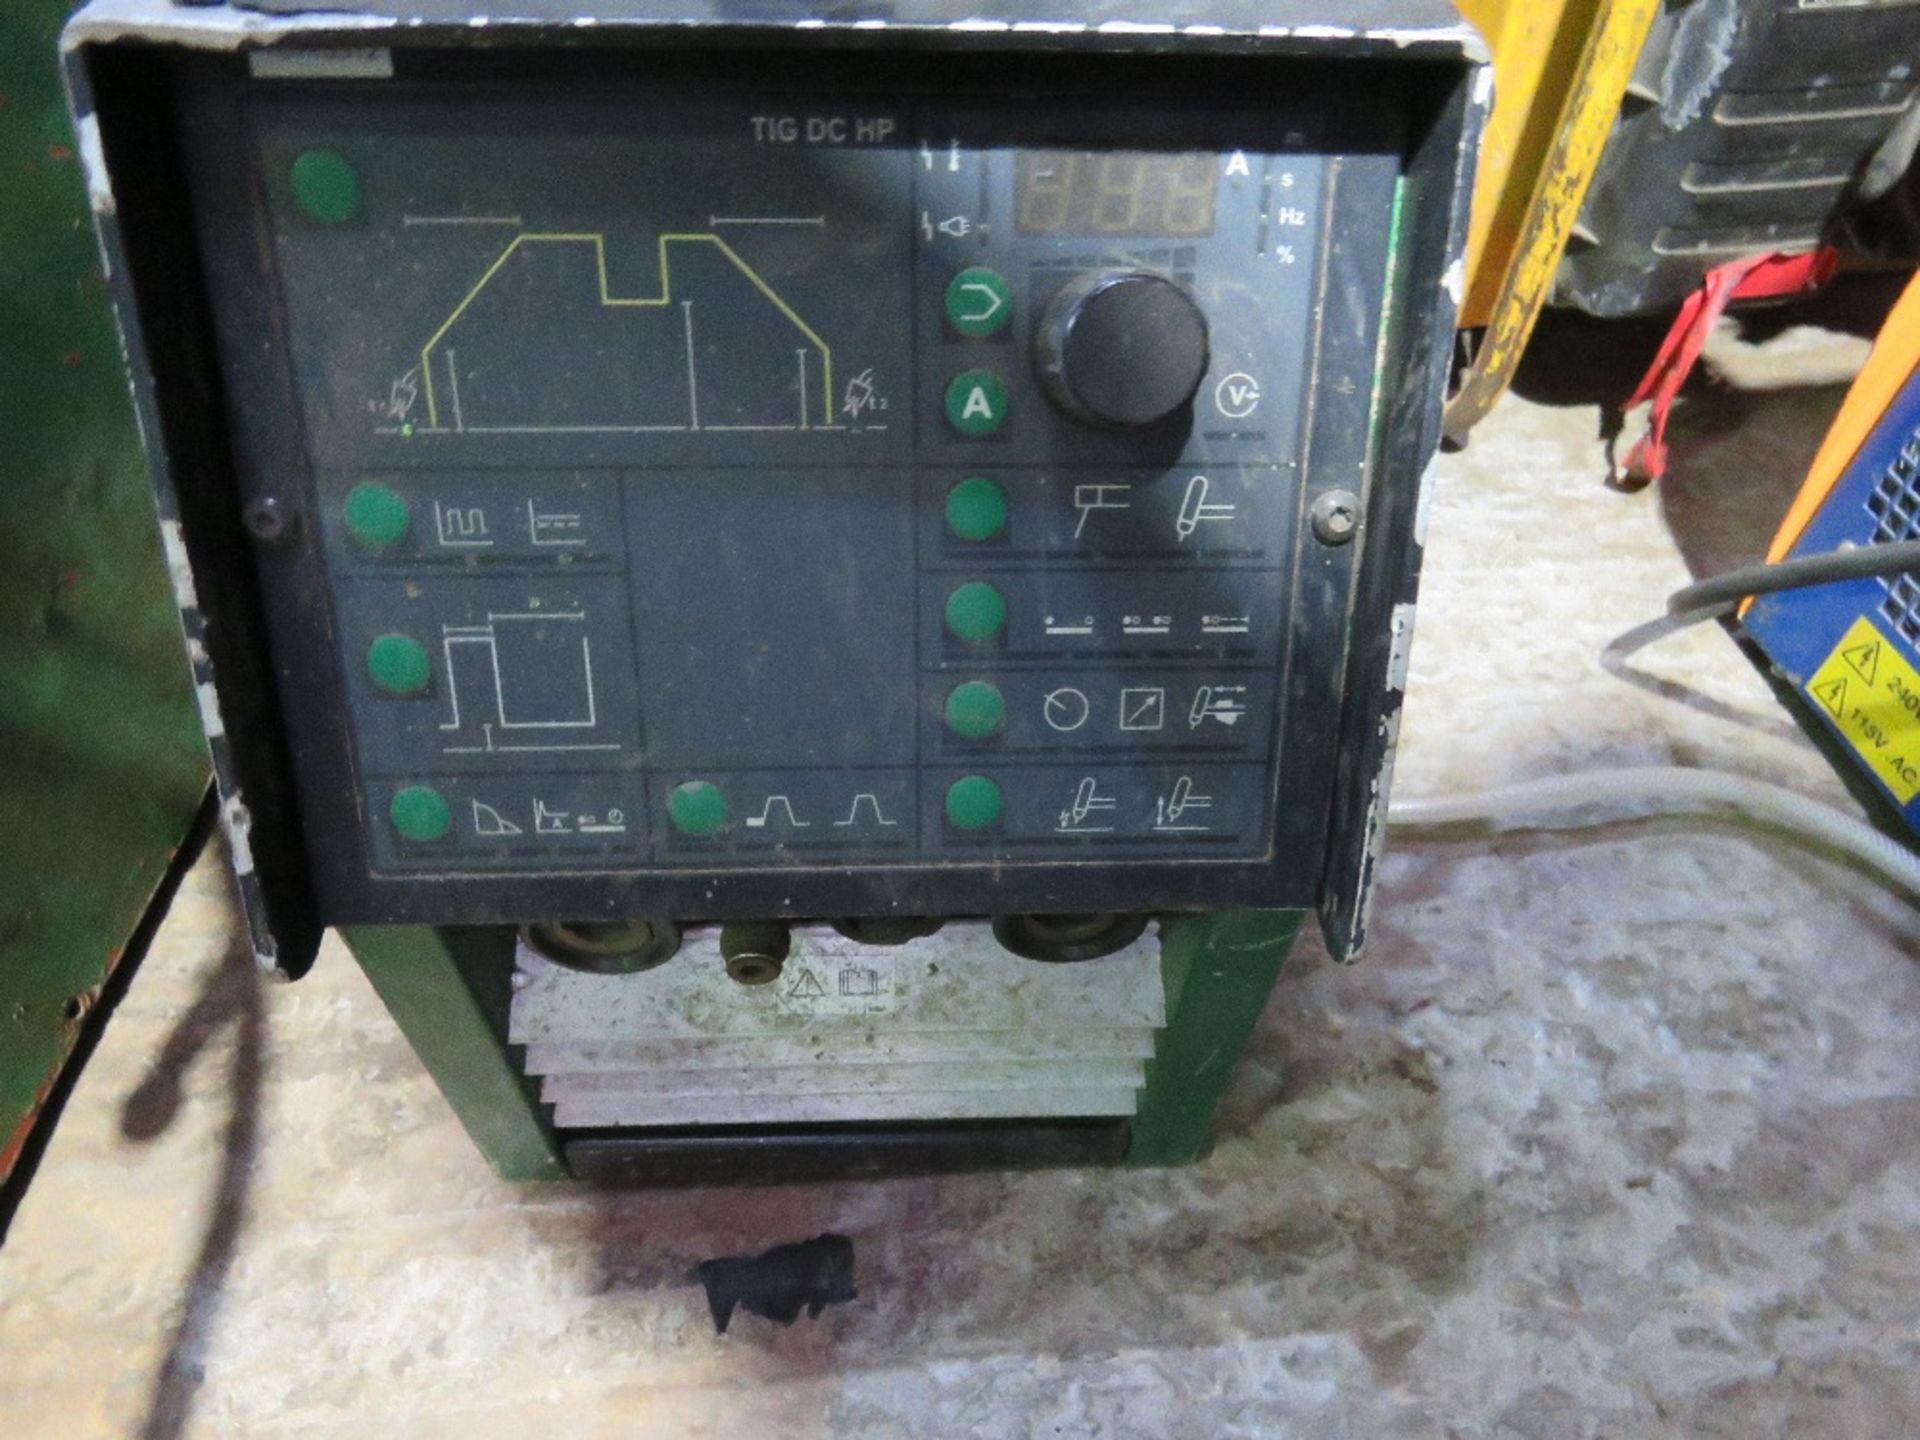 MIGATRONIC PILOT 2400 3 PHASE WELDER. DIRECT FROM LOCAL COMPANY. SURPLUS TO REQUIREMENTS.